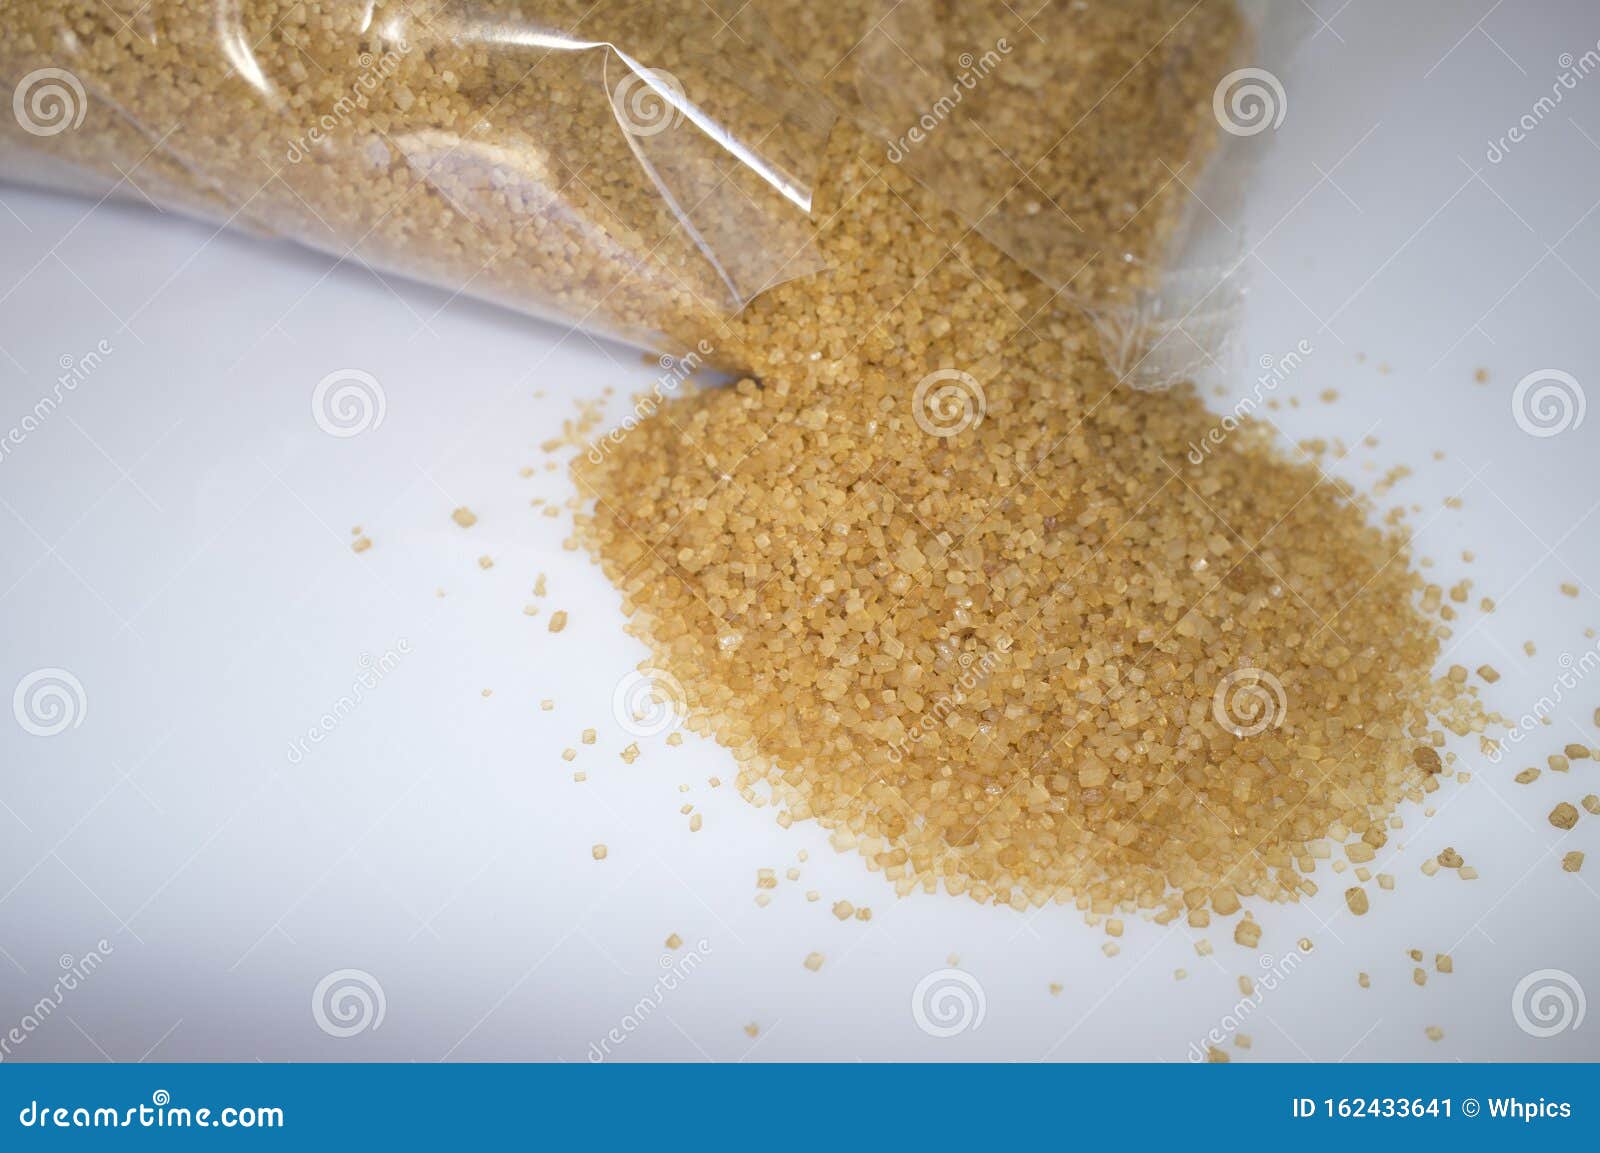 Download 1 482 Sugar Plastic Bag Photos Free Royalty Free Stock Photos From Dreamstime Yellowimages Mockups